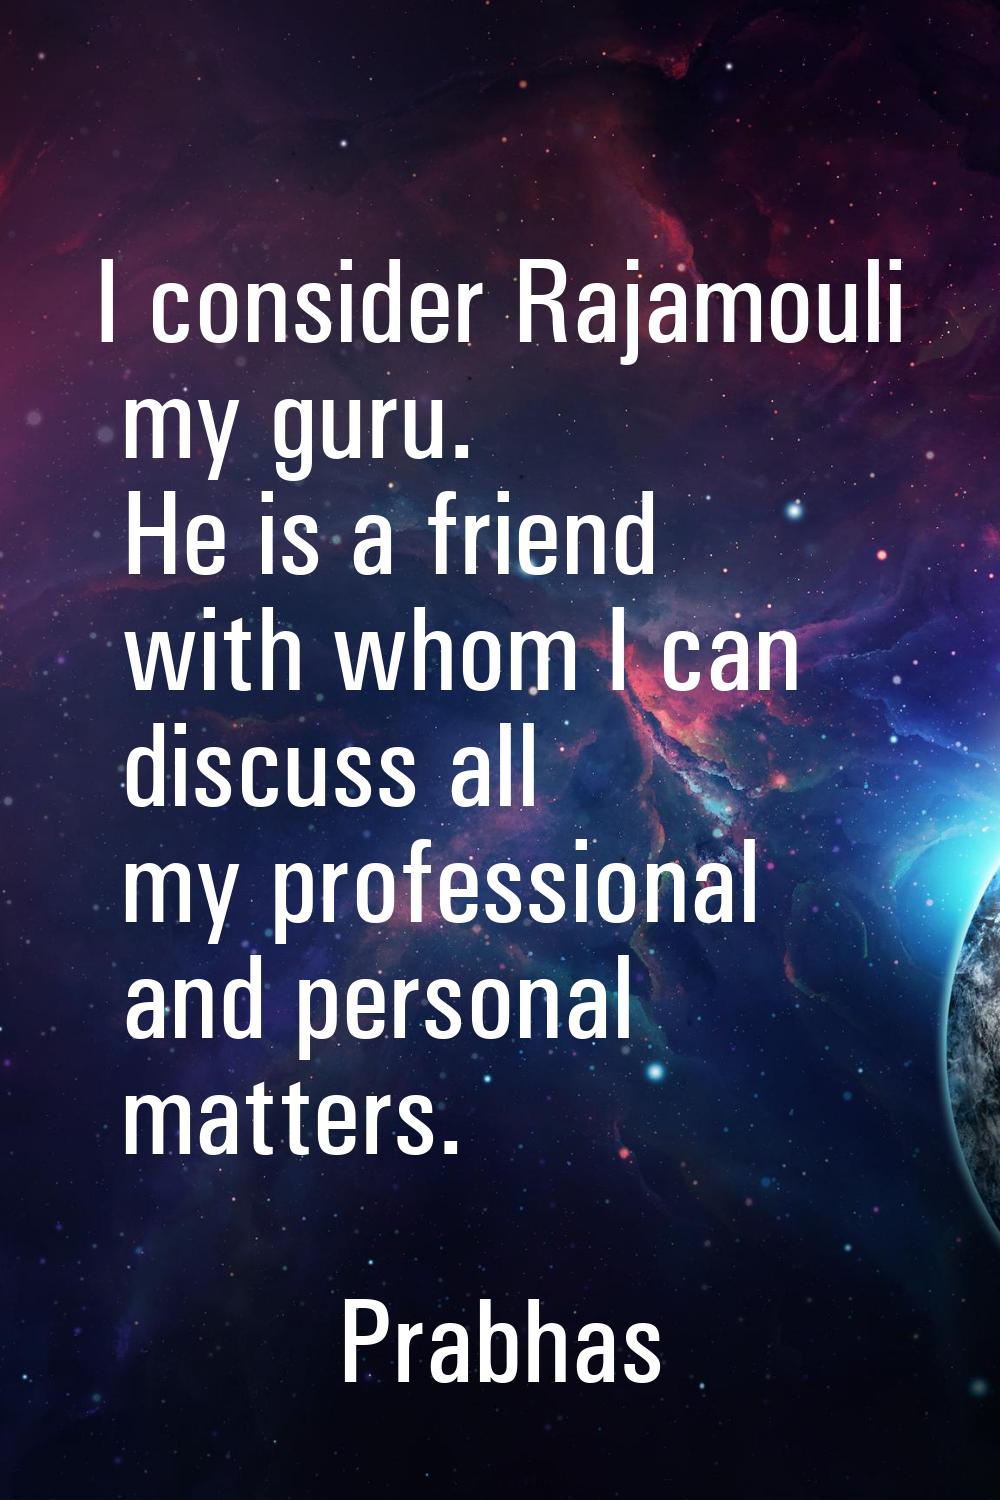 I consider Rajamouli my guru. He is a friend with whom I can discuss all my professional and person